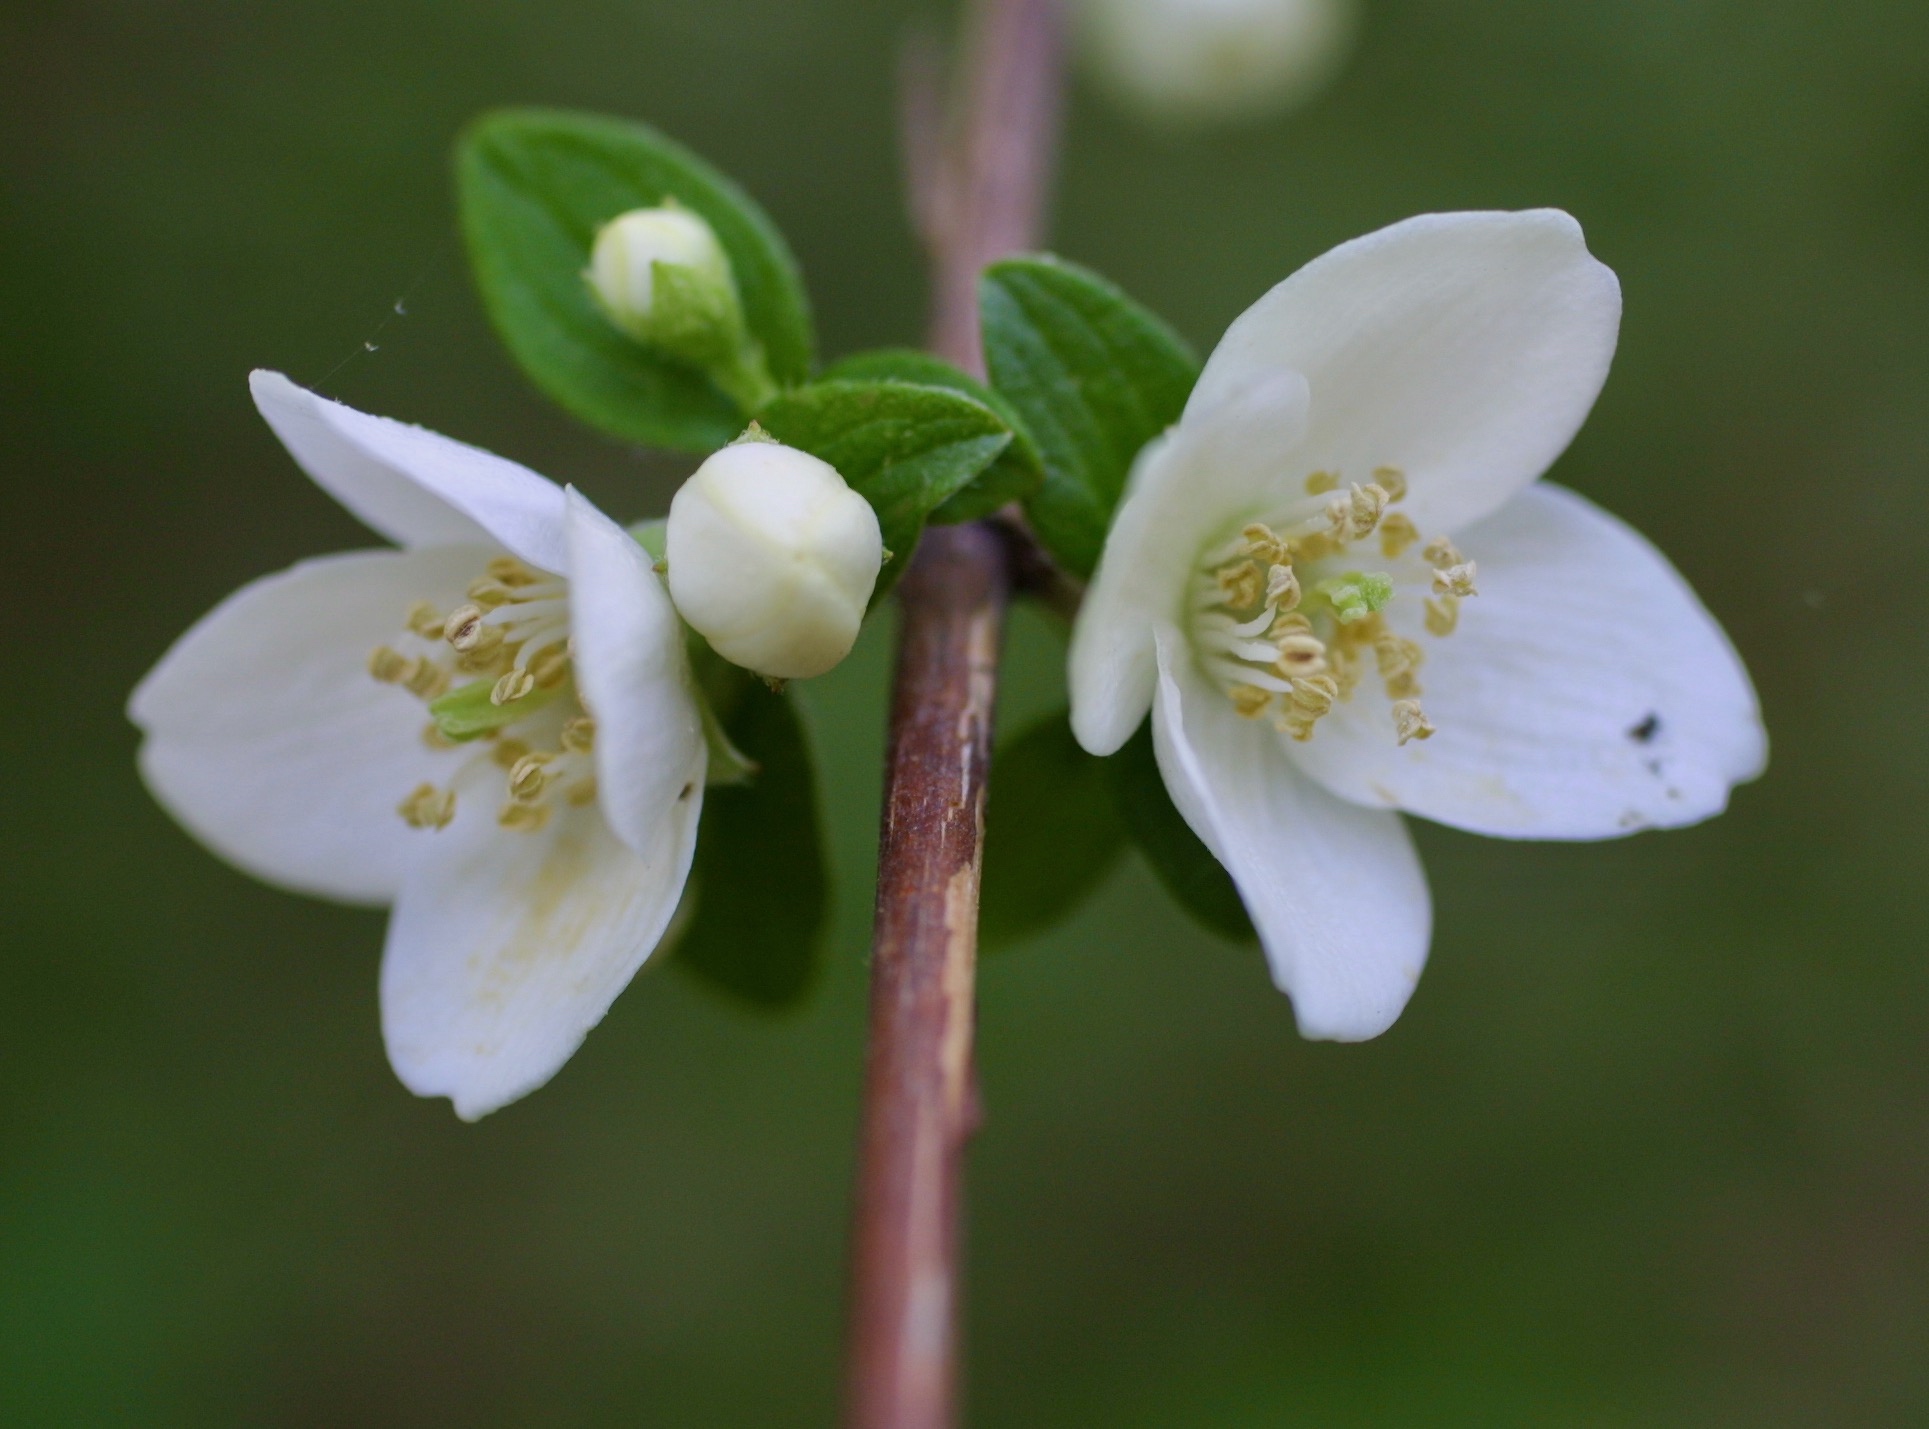 The Scientific Name is Philadelphus inodorus. You will likely hear them called Appalachian Mock-orange. This picture shows the Opposite leaves and showy white flowers lacking fragrance of Philadelphus inodorus